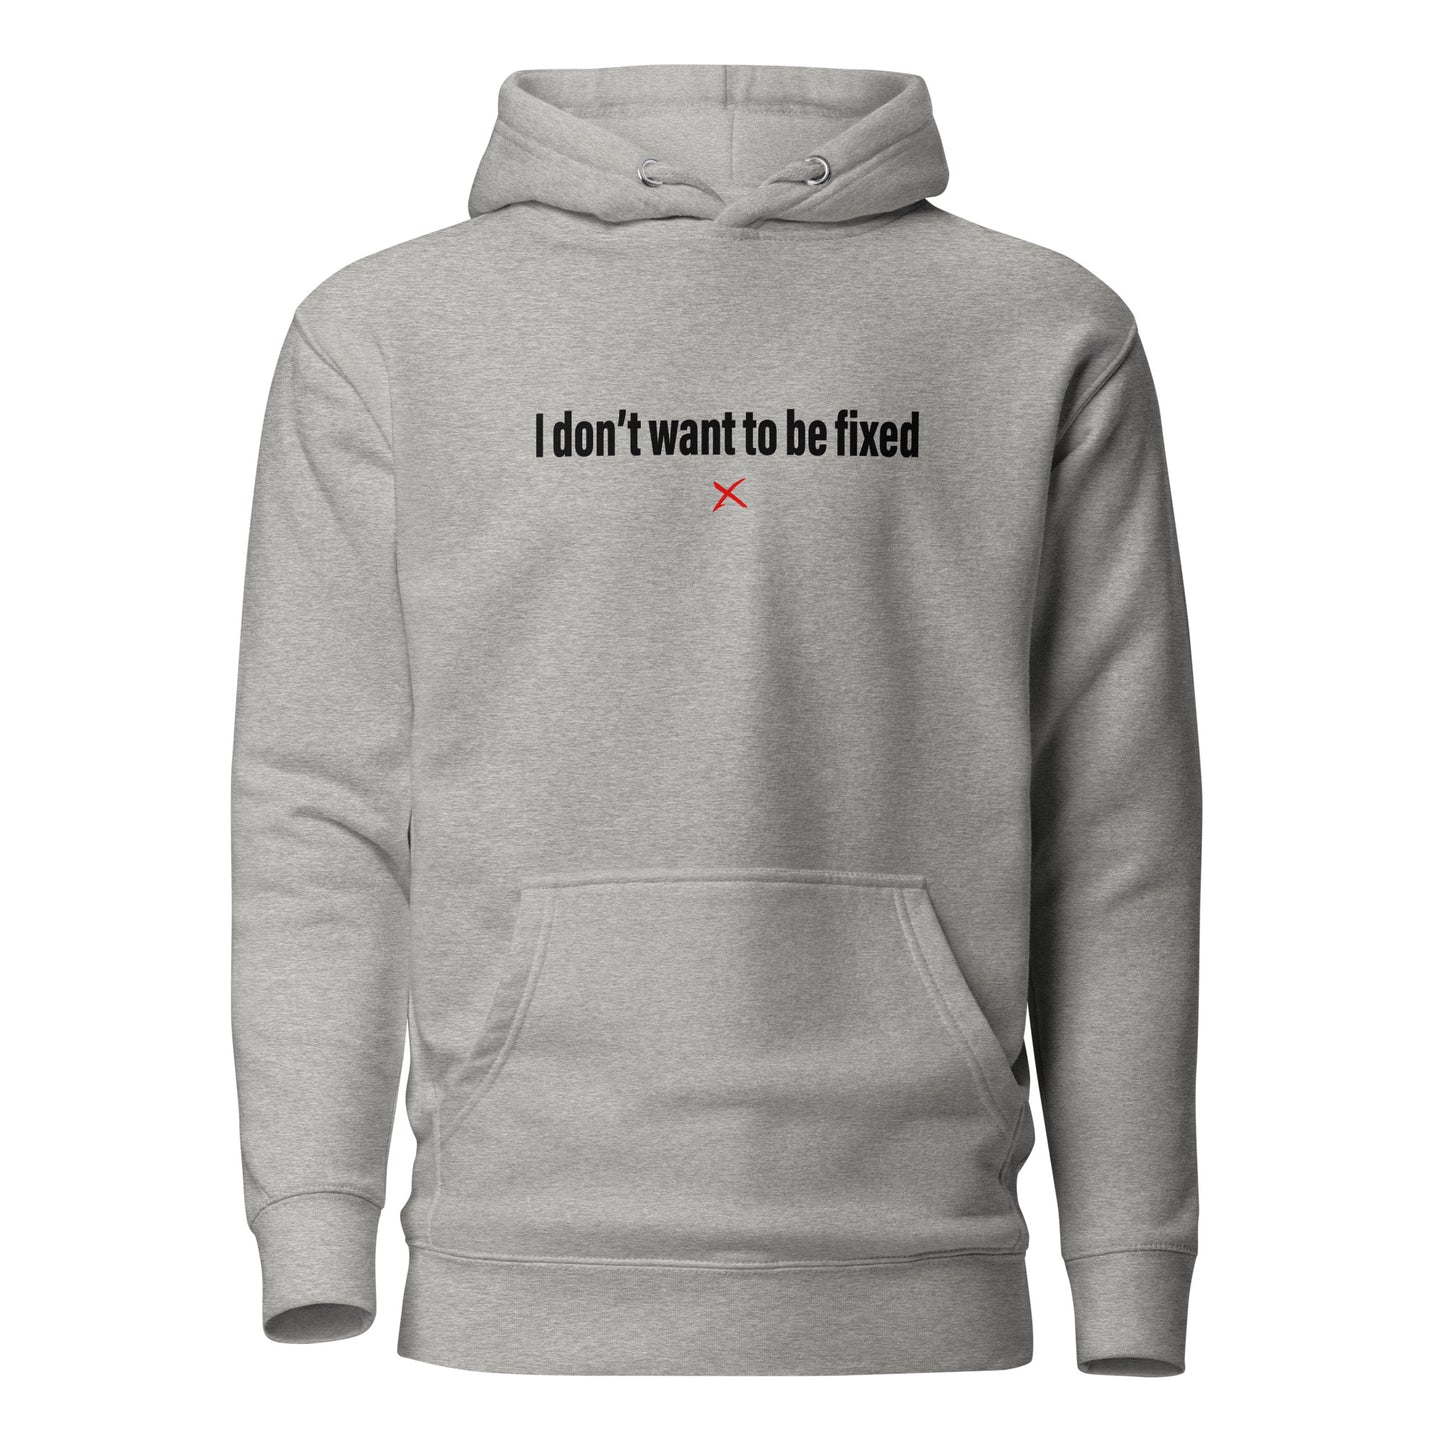 I don't want to be fixed - Hoodie